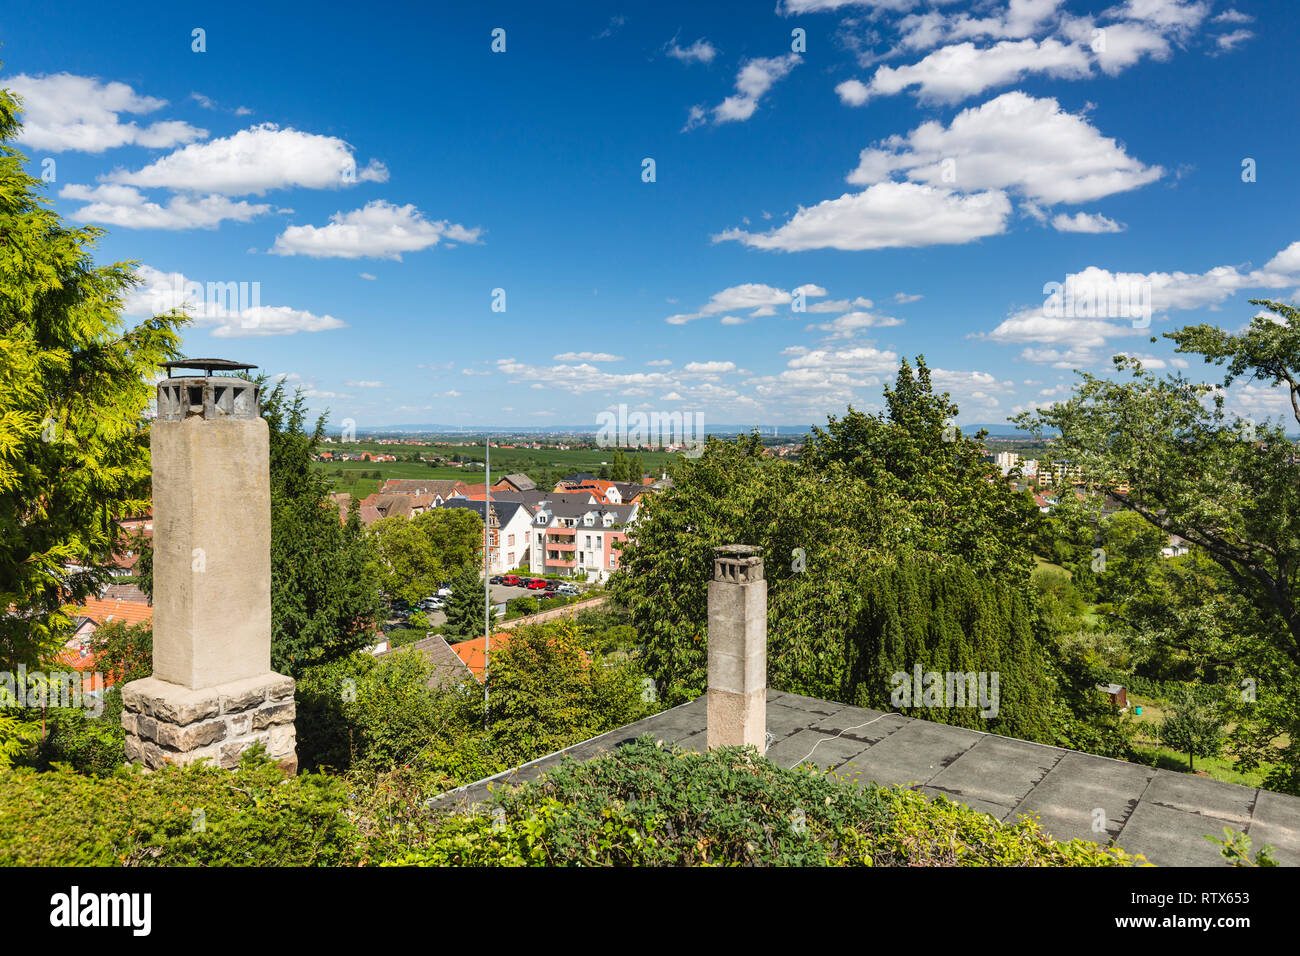 View from a hill over Neustadt an der Weinstrasse, Germany on a clear summer day to the distant mountains of the Odenwald. Stock Photo